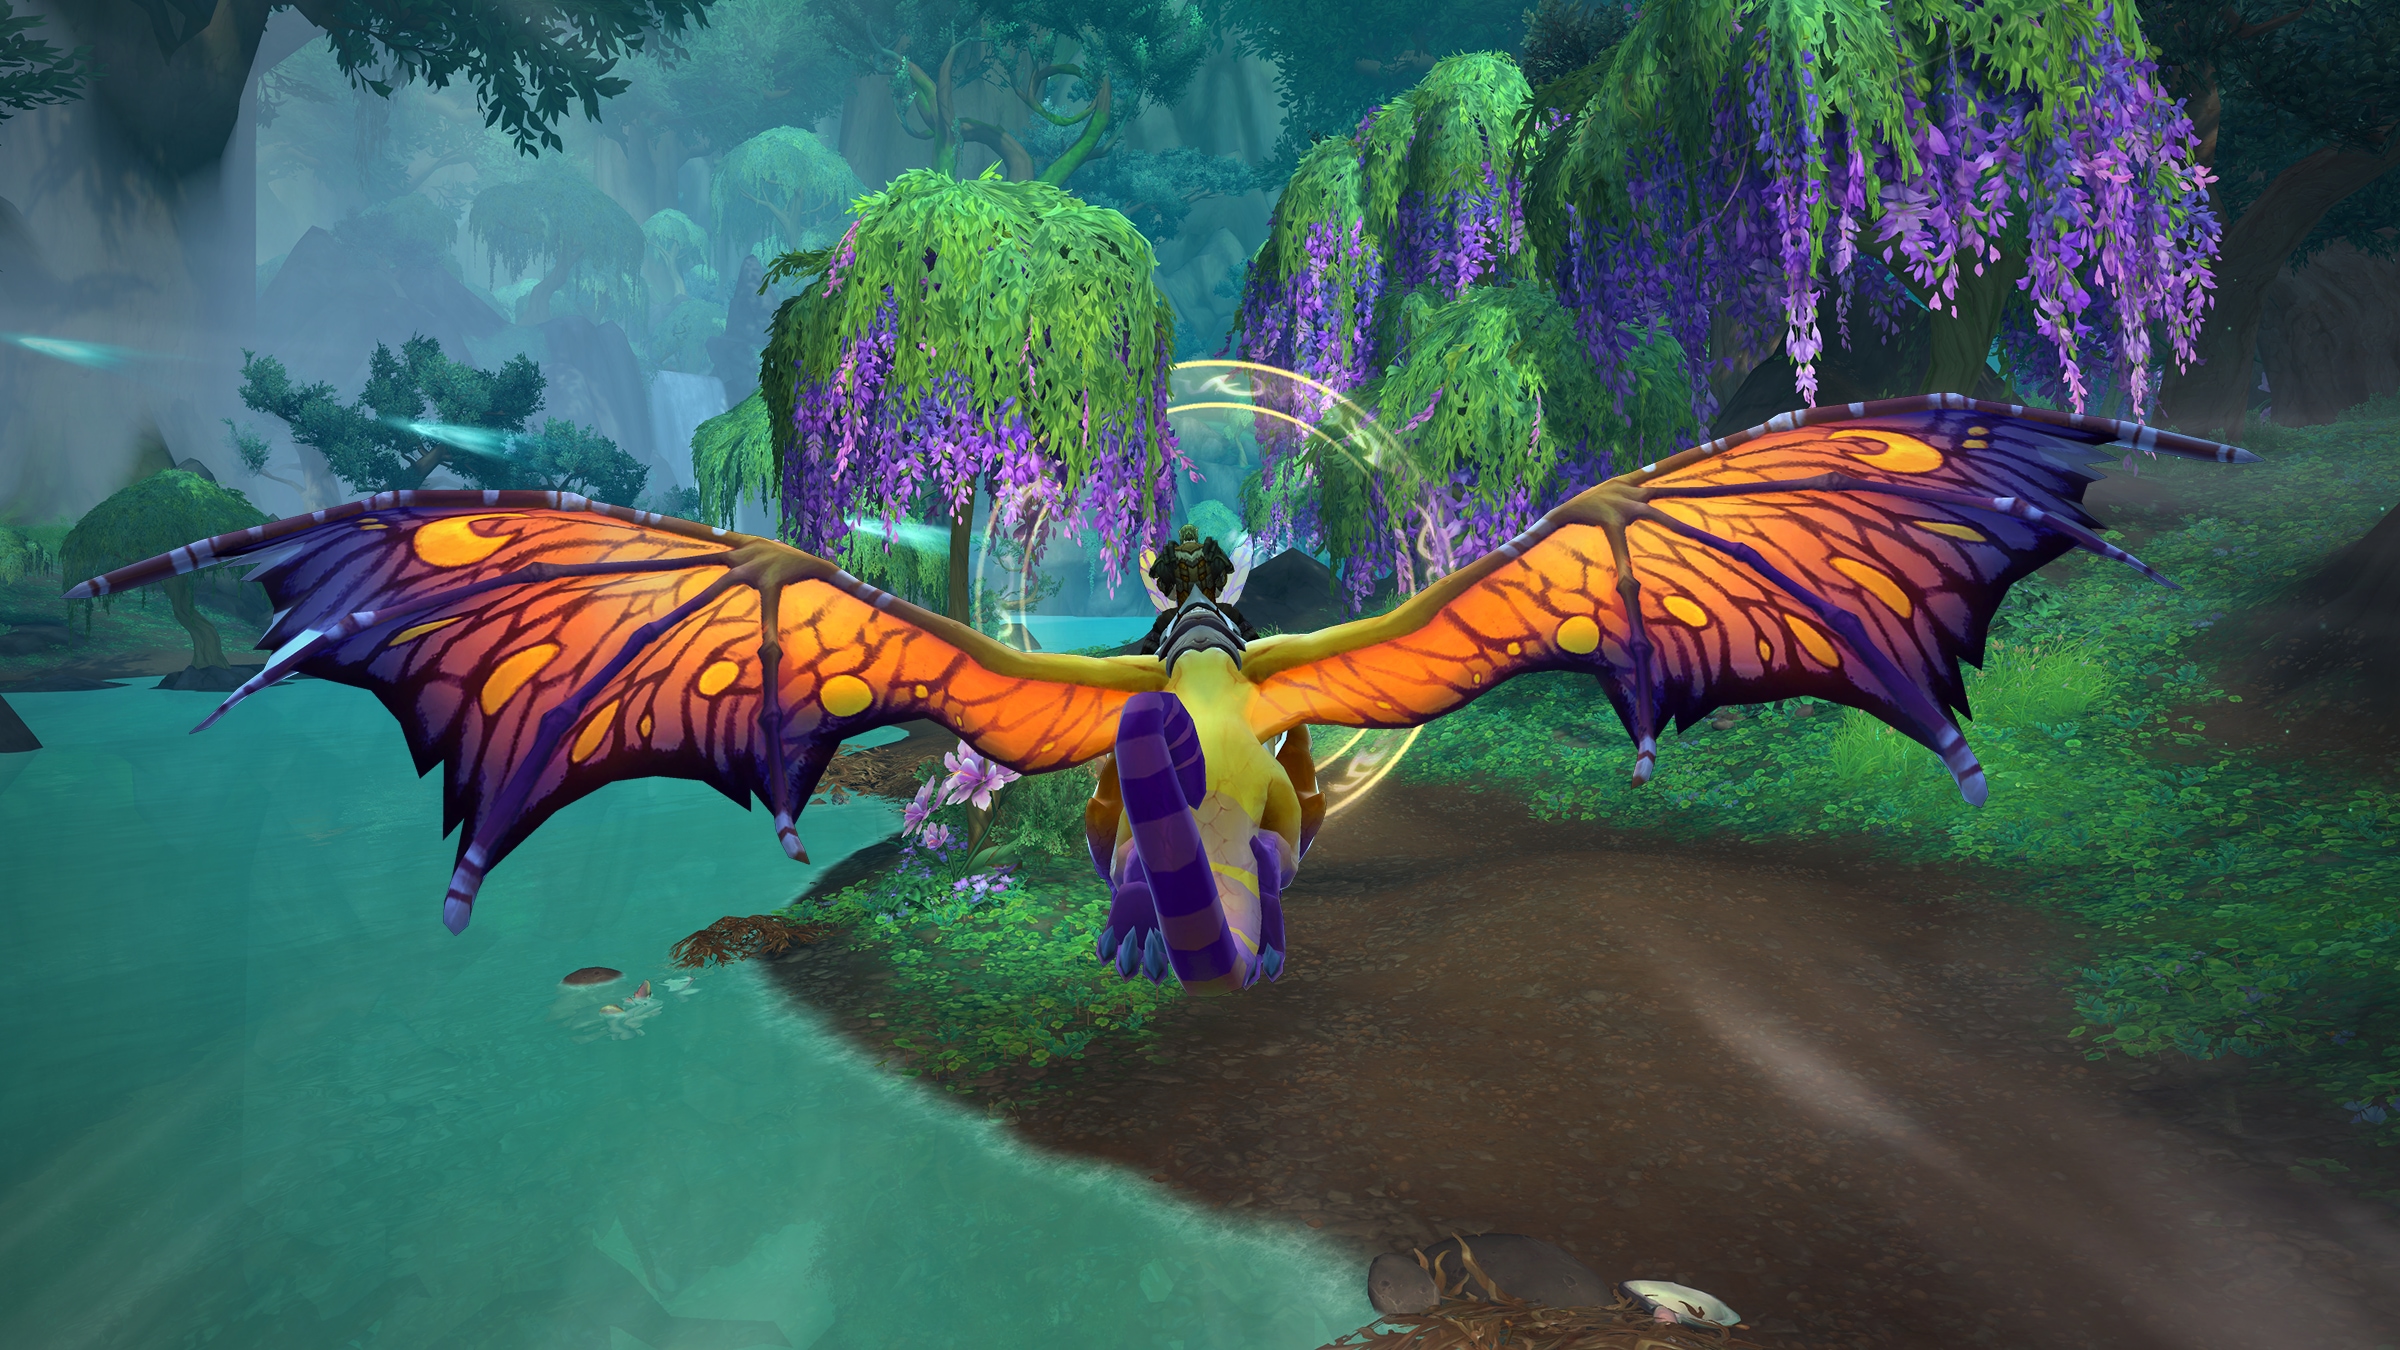 Take Flight in the Emerald Dream with Dragonriding Updates